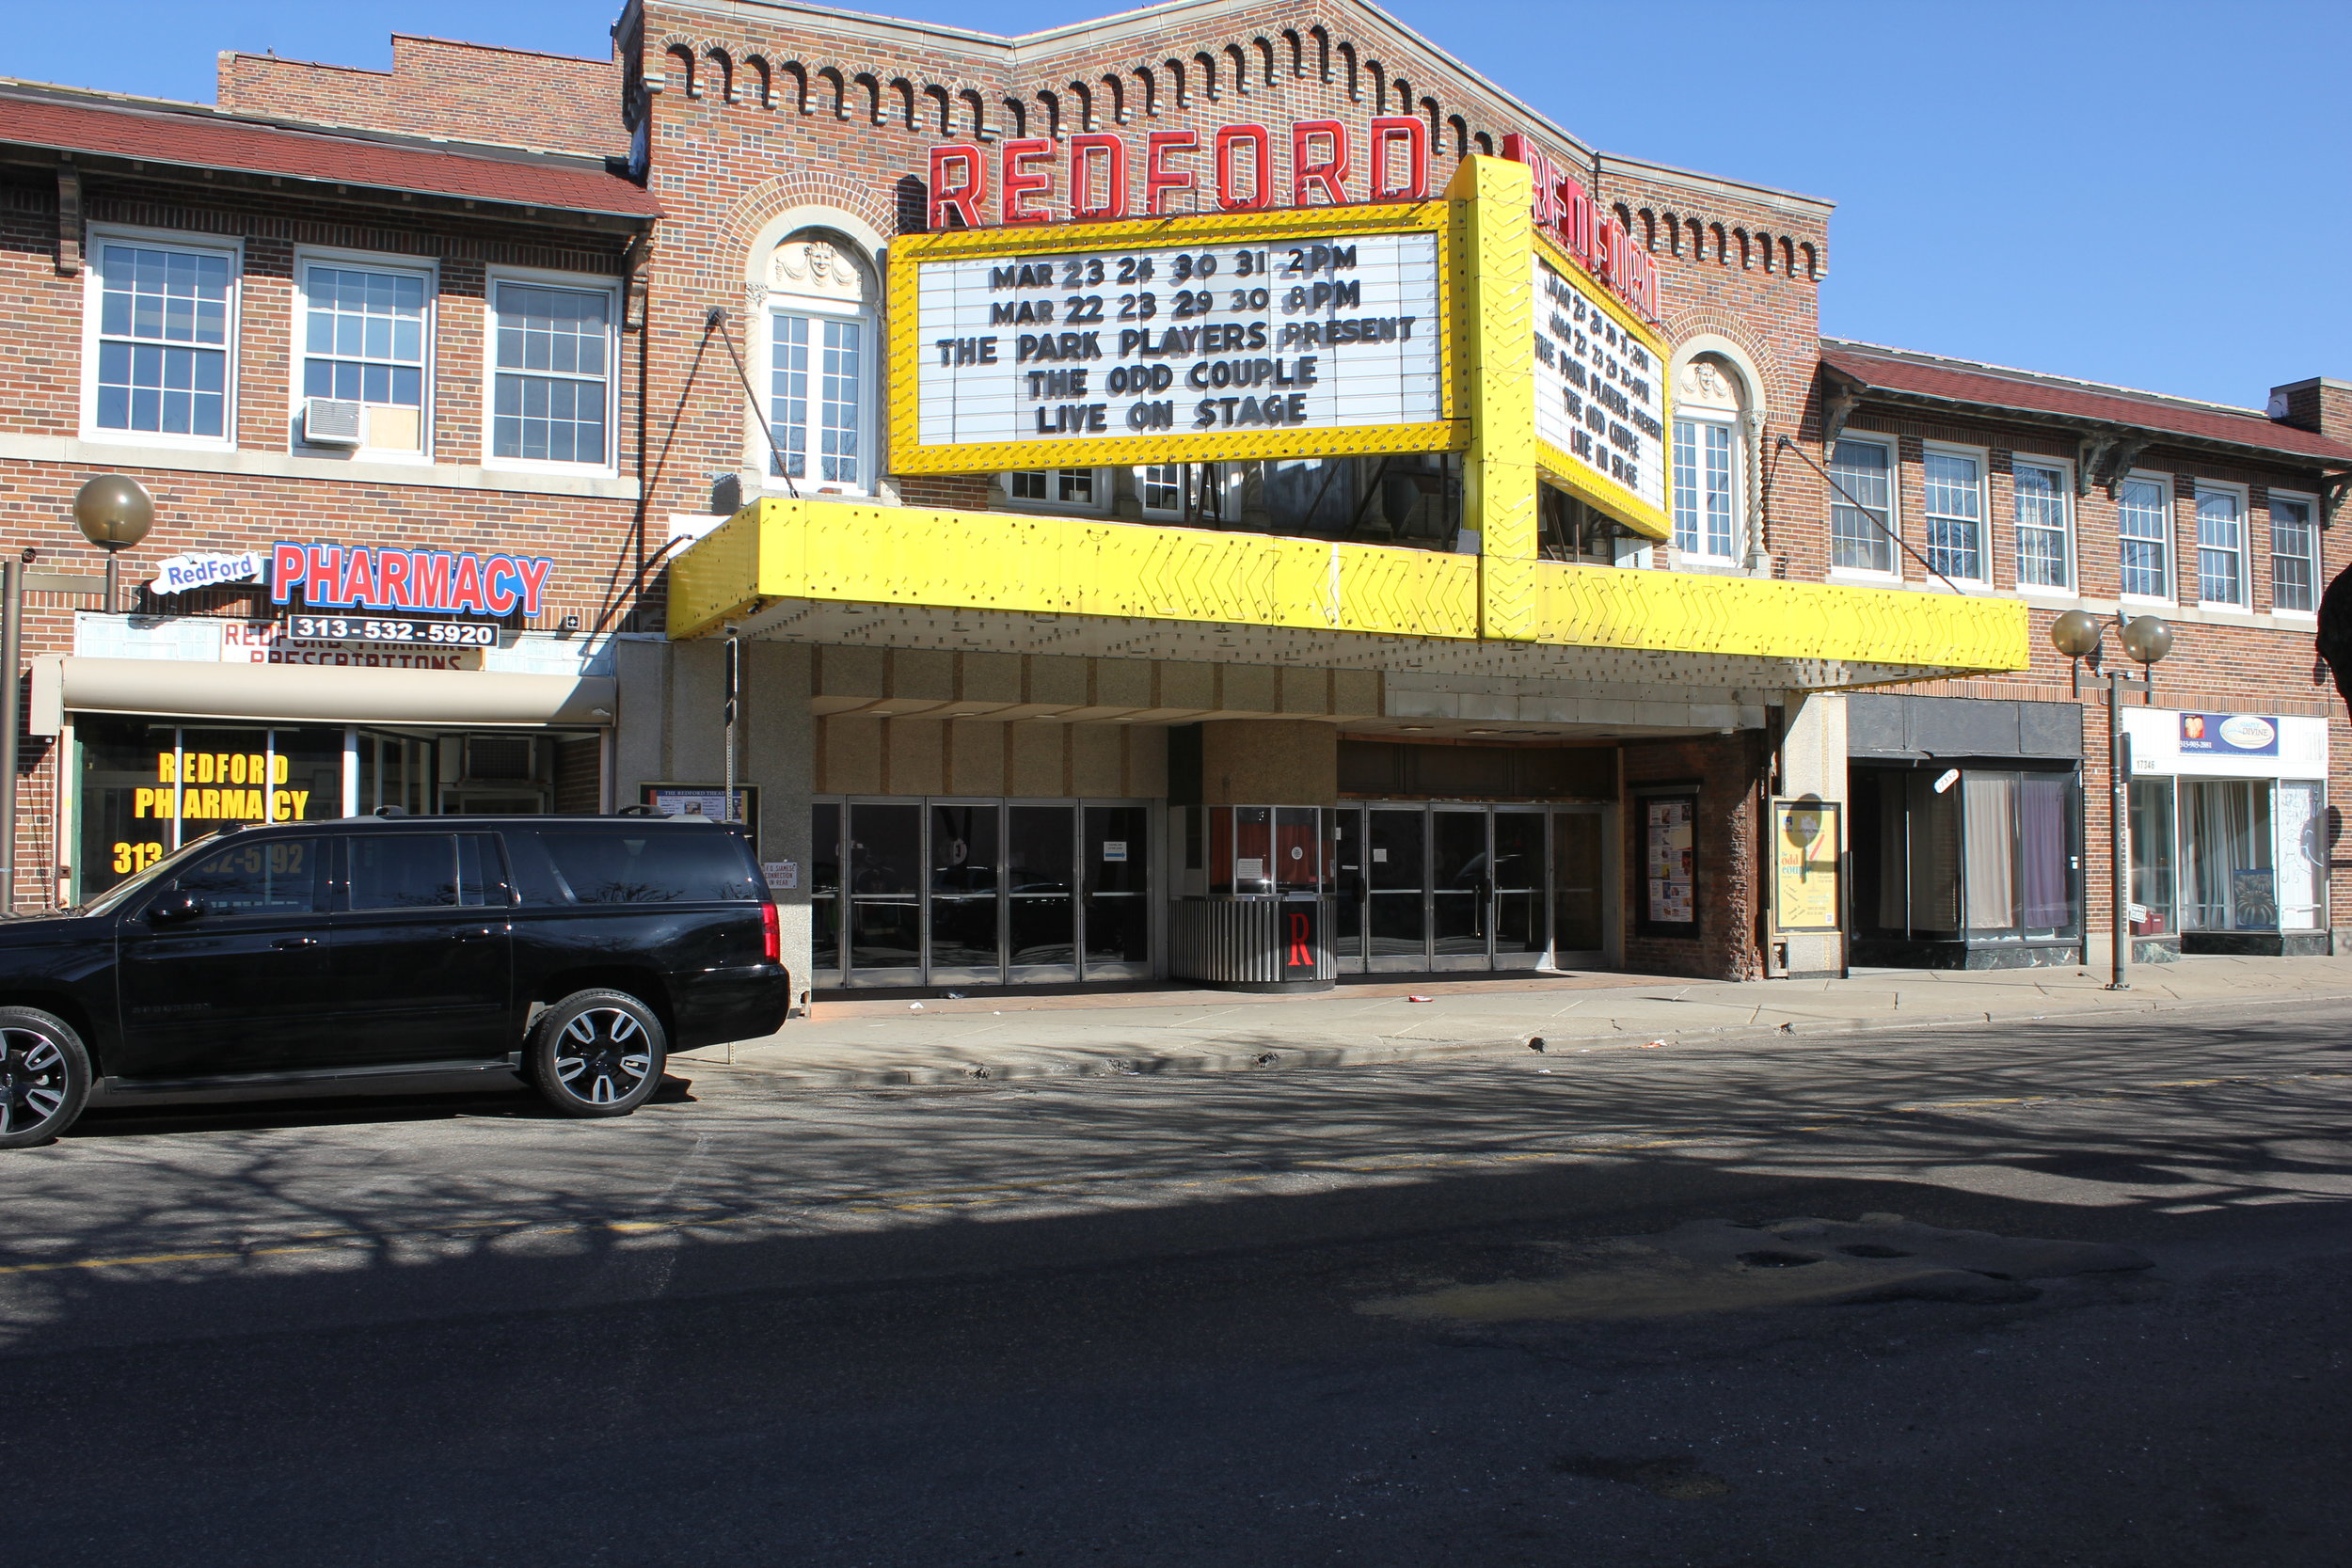 Redford Theater Marquee.JPG